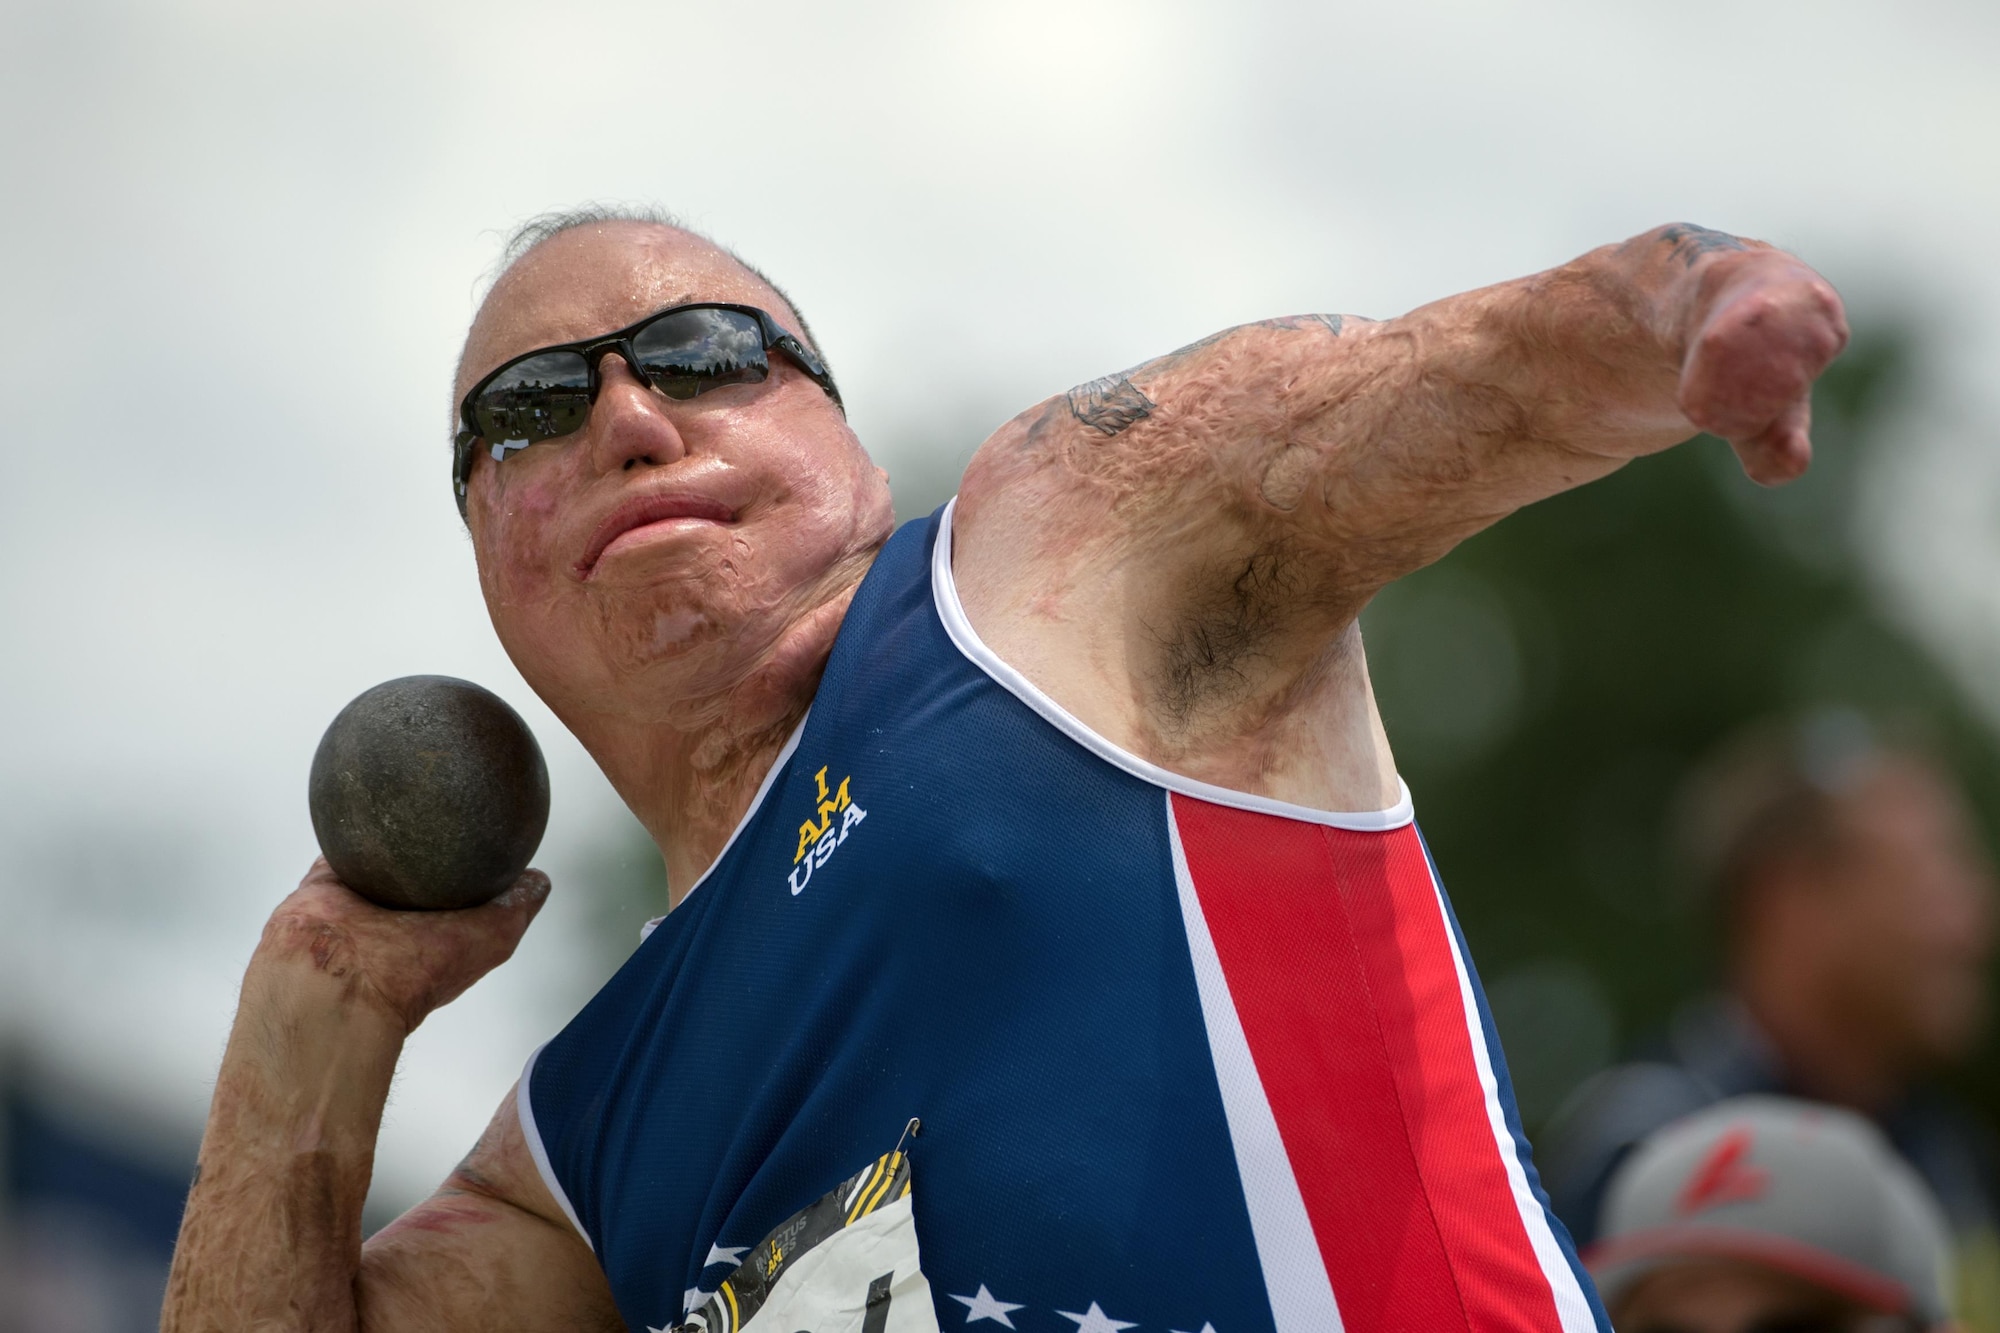 Master Sgt. Israel Del Toro throws a shotput during the 2016 Invictus Games in Orlando, Fla., May 10, 2016. He earned a gold medal in the men’s shot put in his disability category. (DOD photo/EJ Hersom)